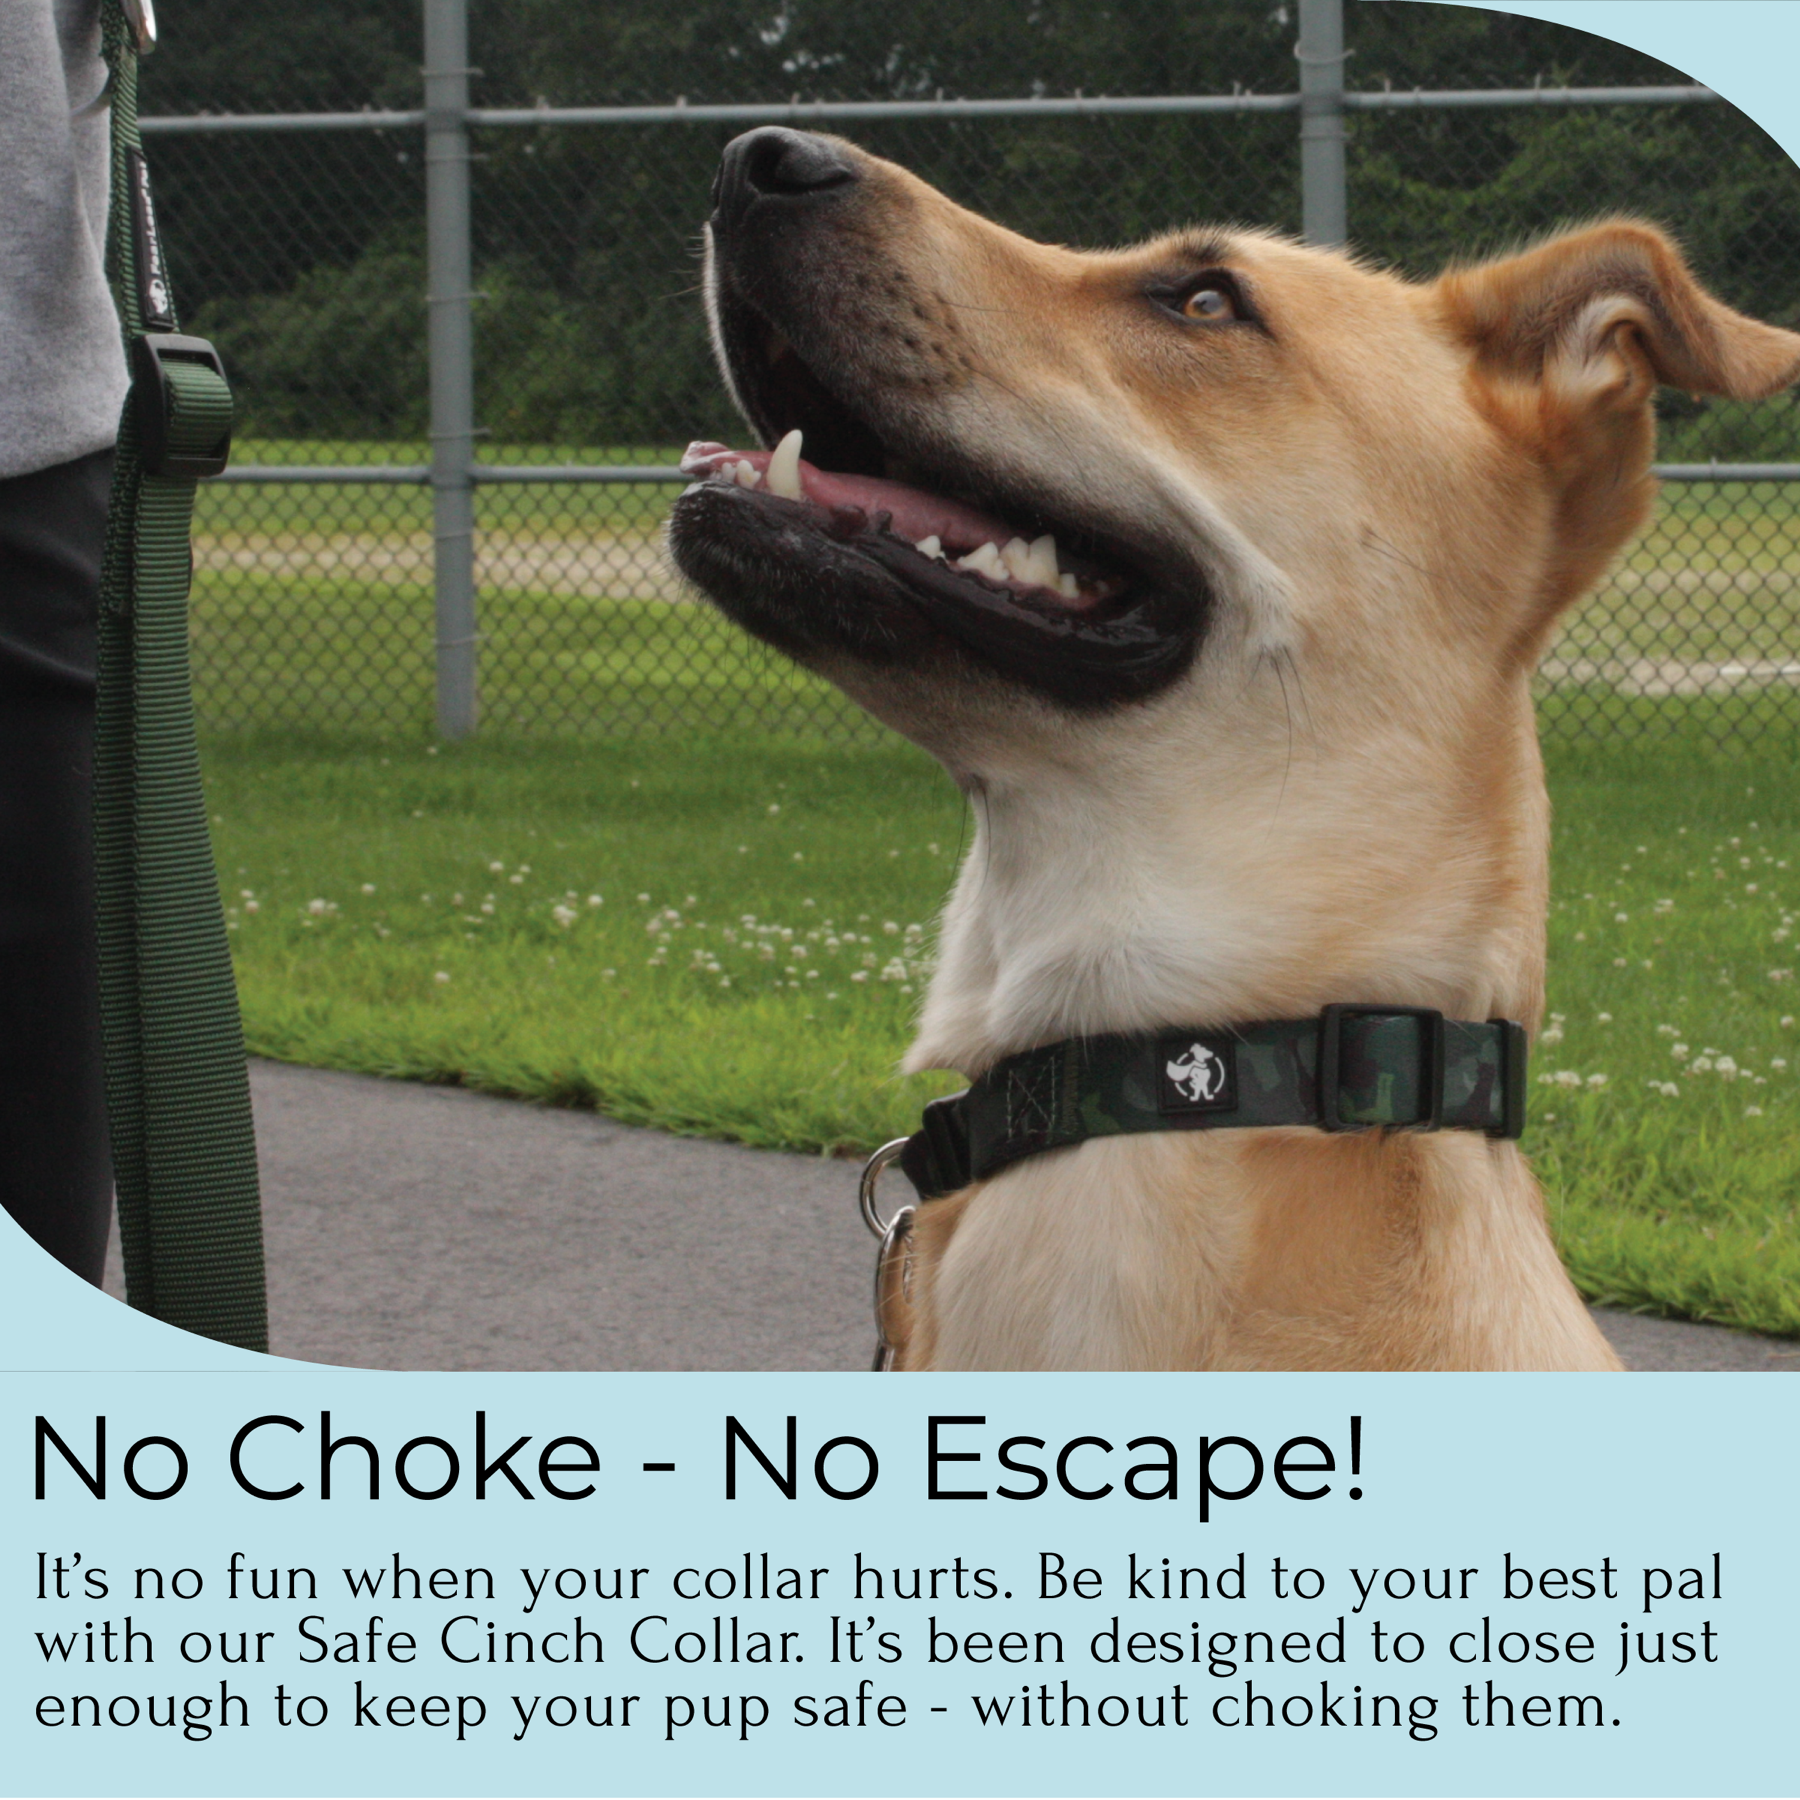 an infographic of a blonde shepherd dog wearing a green camouflage collar with a fearless pet logo. Text below explains the no choke no escape dog collar 